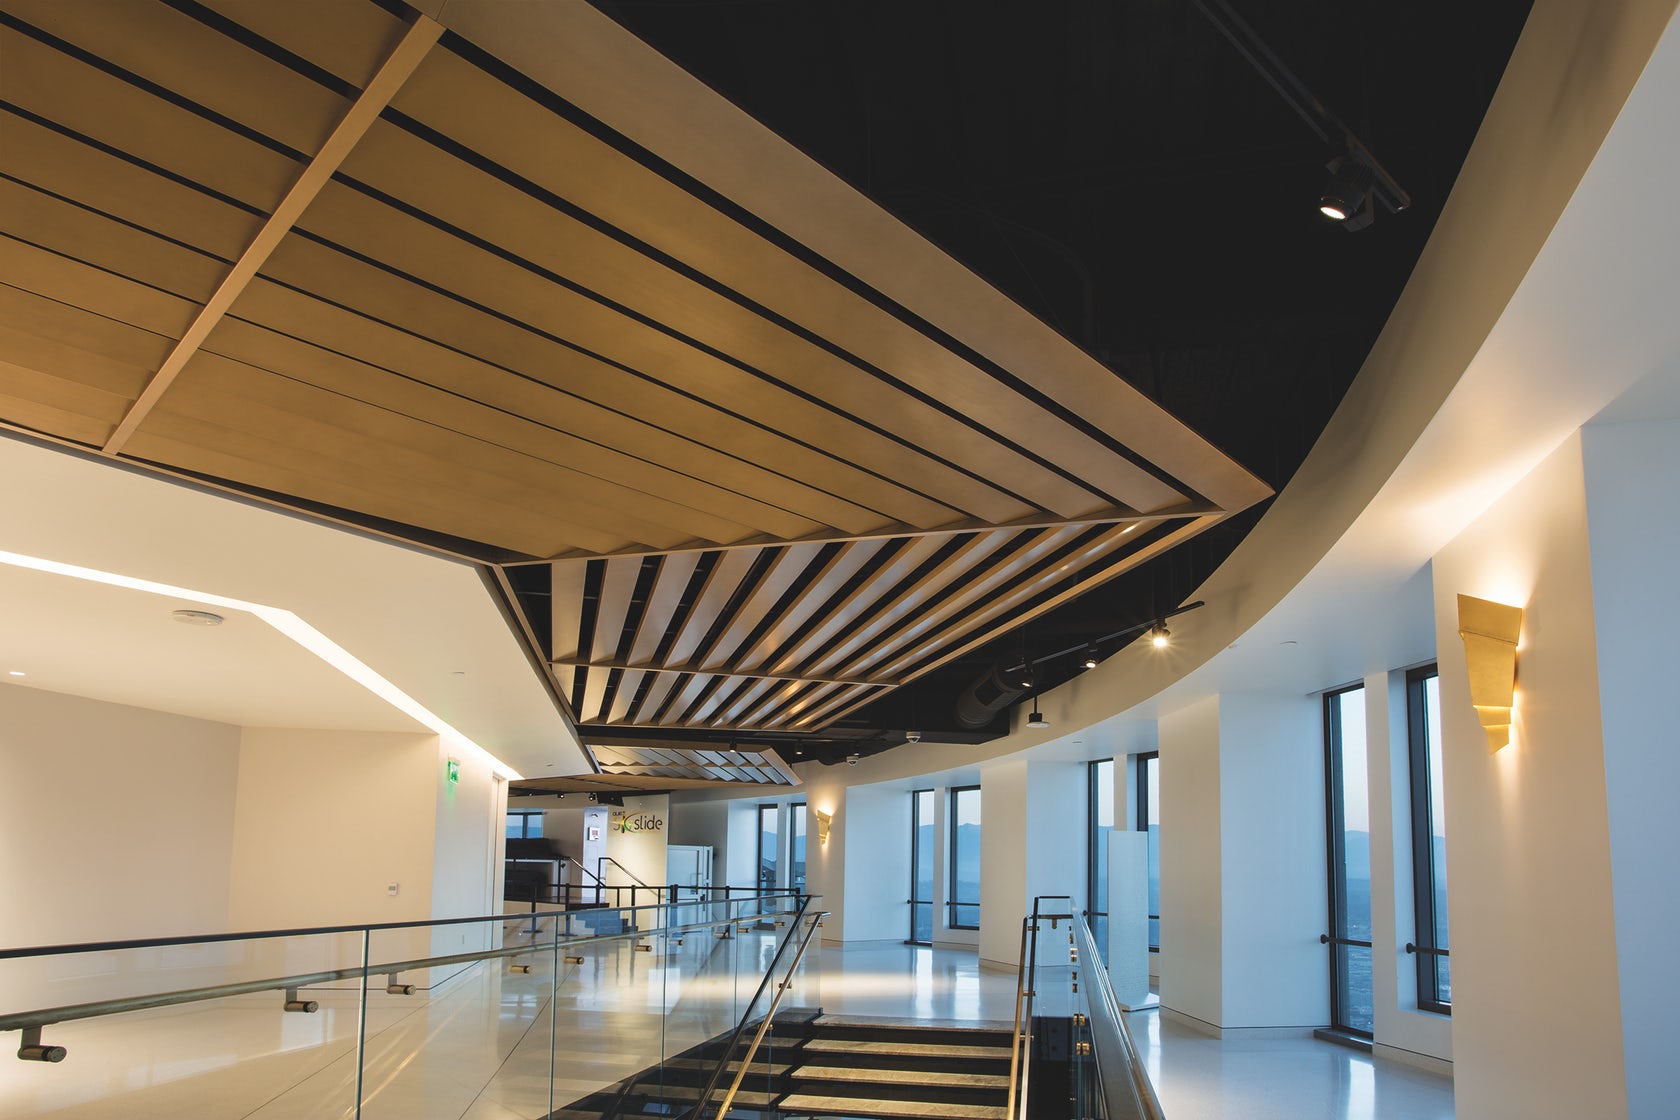 Find out how to Acoustic Ceiling System Armstrong